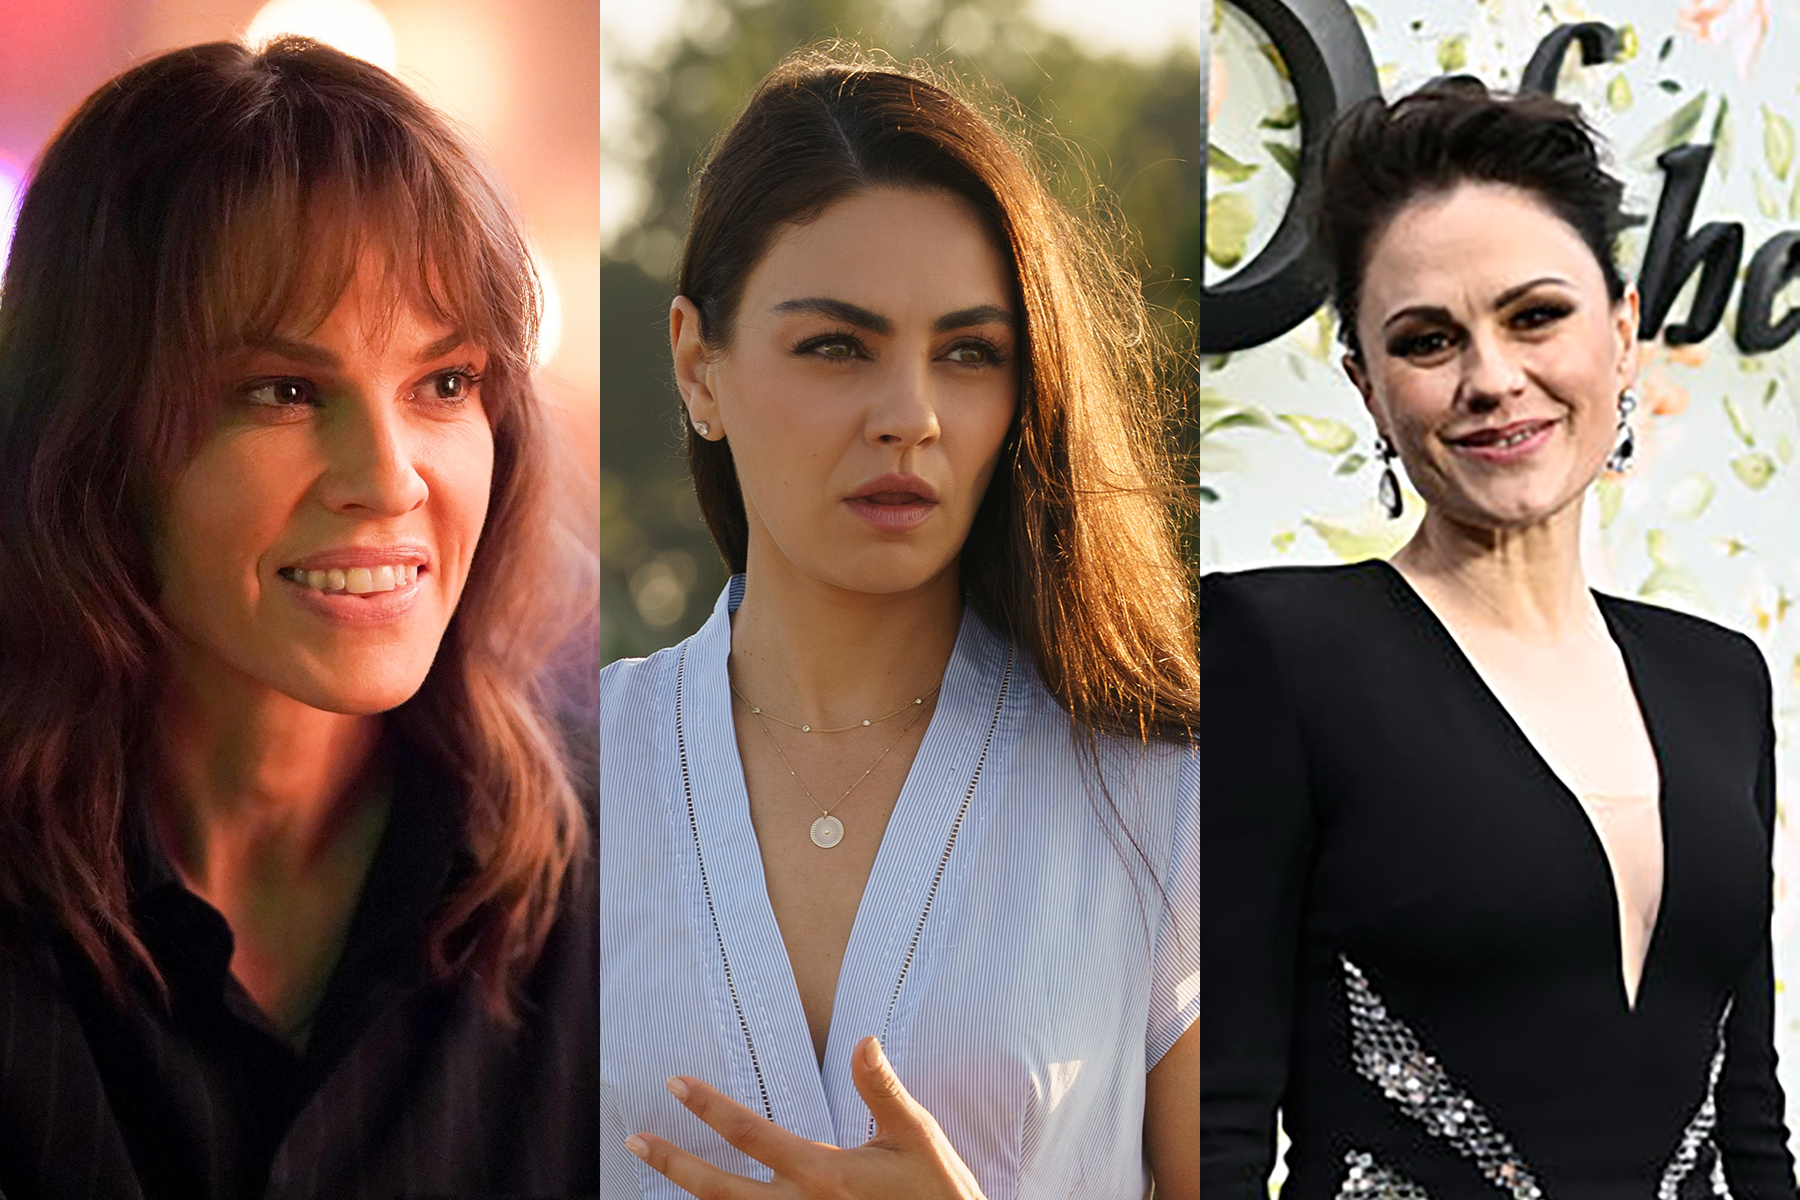 TV best bets with Hilary Swank, Mila Kunis, Anna Paquin, Greys Anatomy, Young Sheldon picture